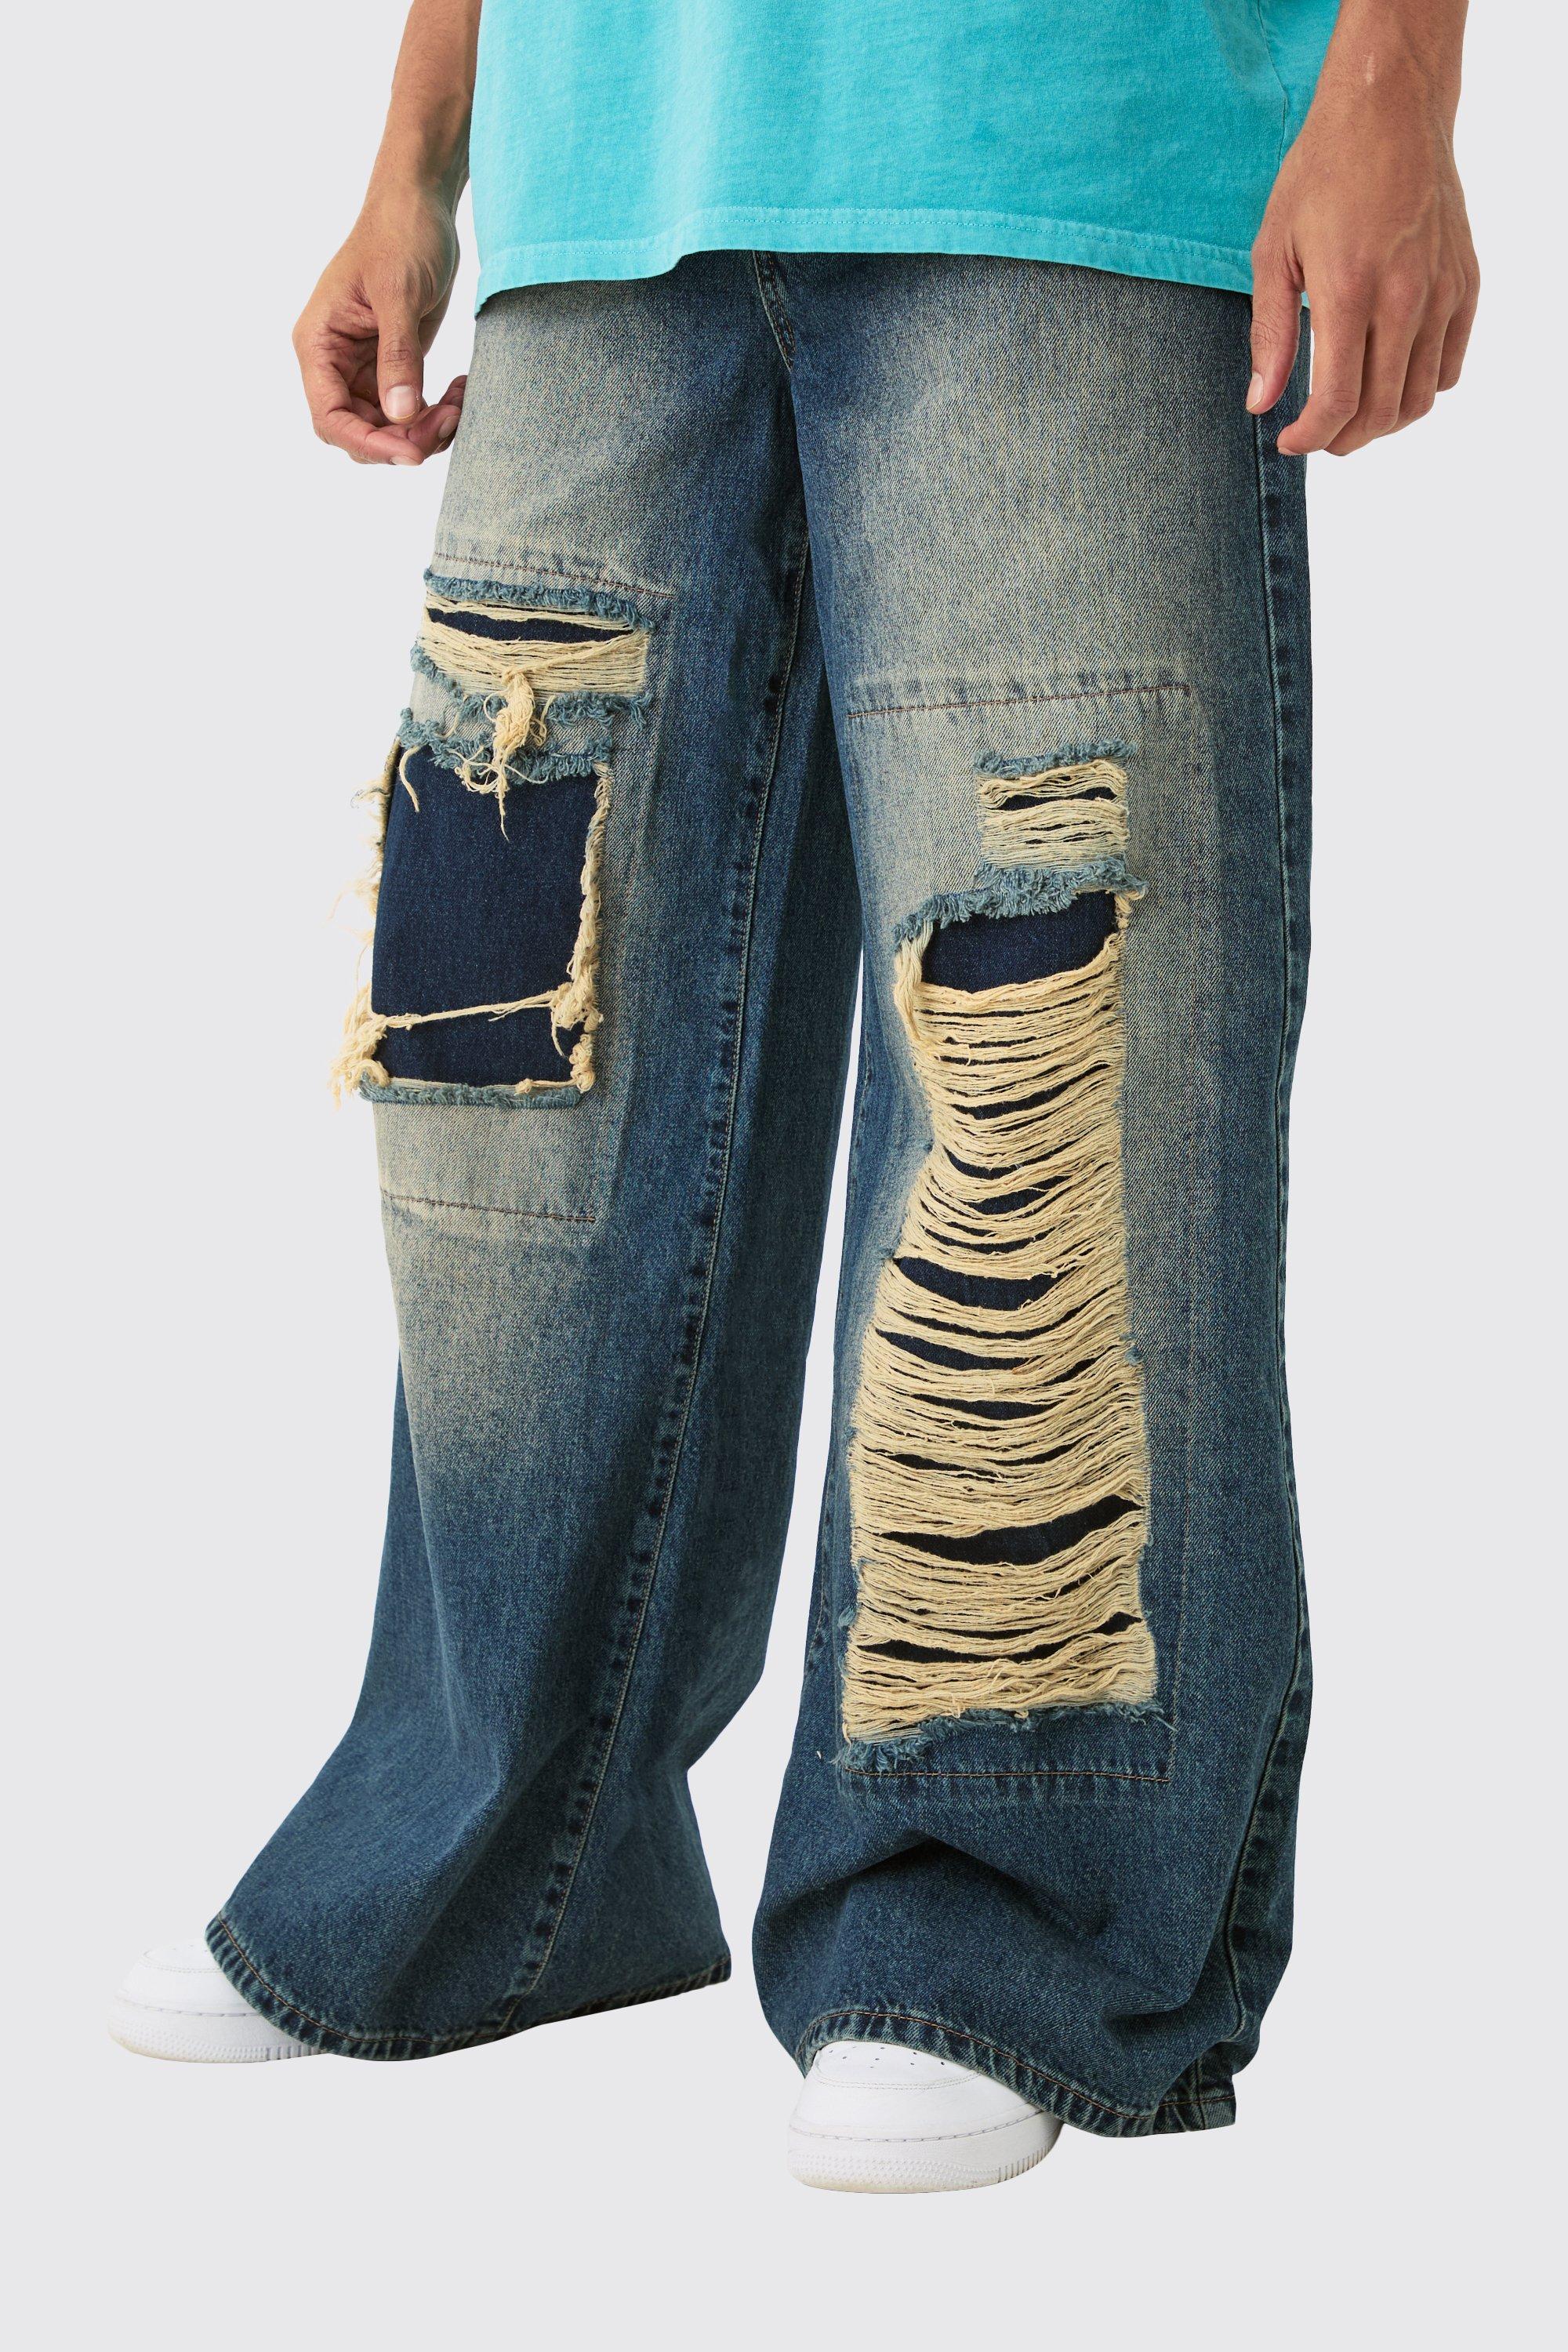 Image of Baggy Rigid Extreme Ripped Denim Jean In Antique Blue, Azzurro